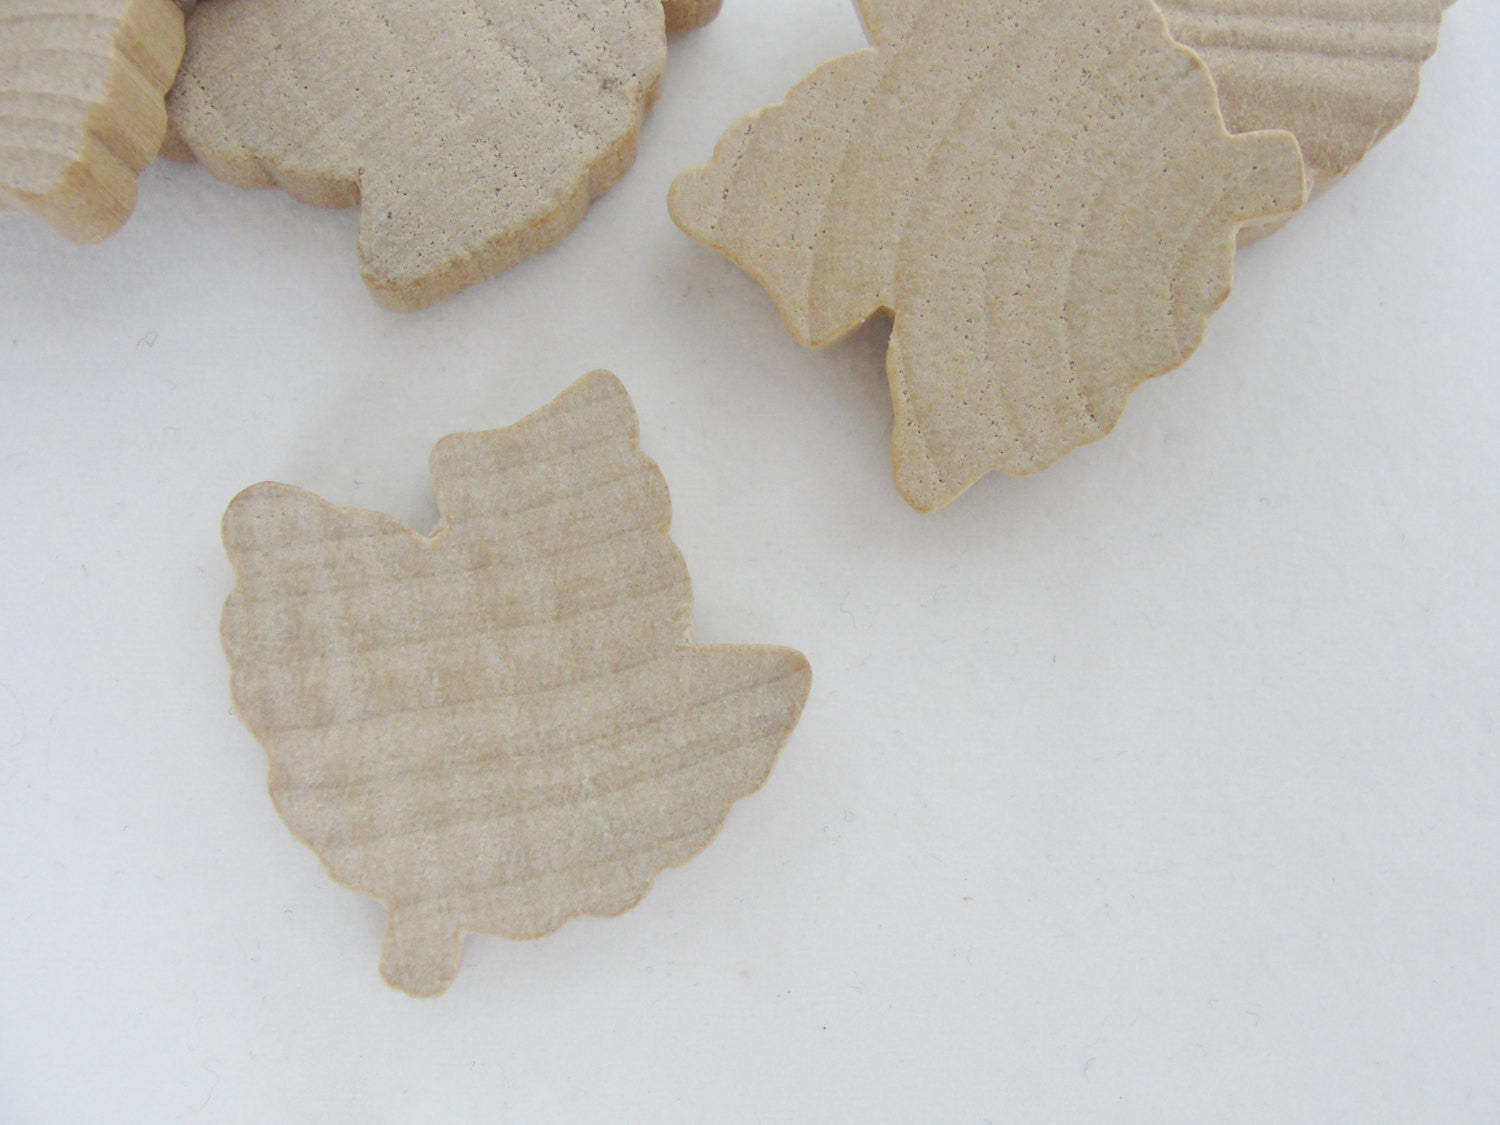 Small Wooden maple leaf cutout set of 6 - Wood parts - Craft Supply House